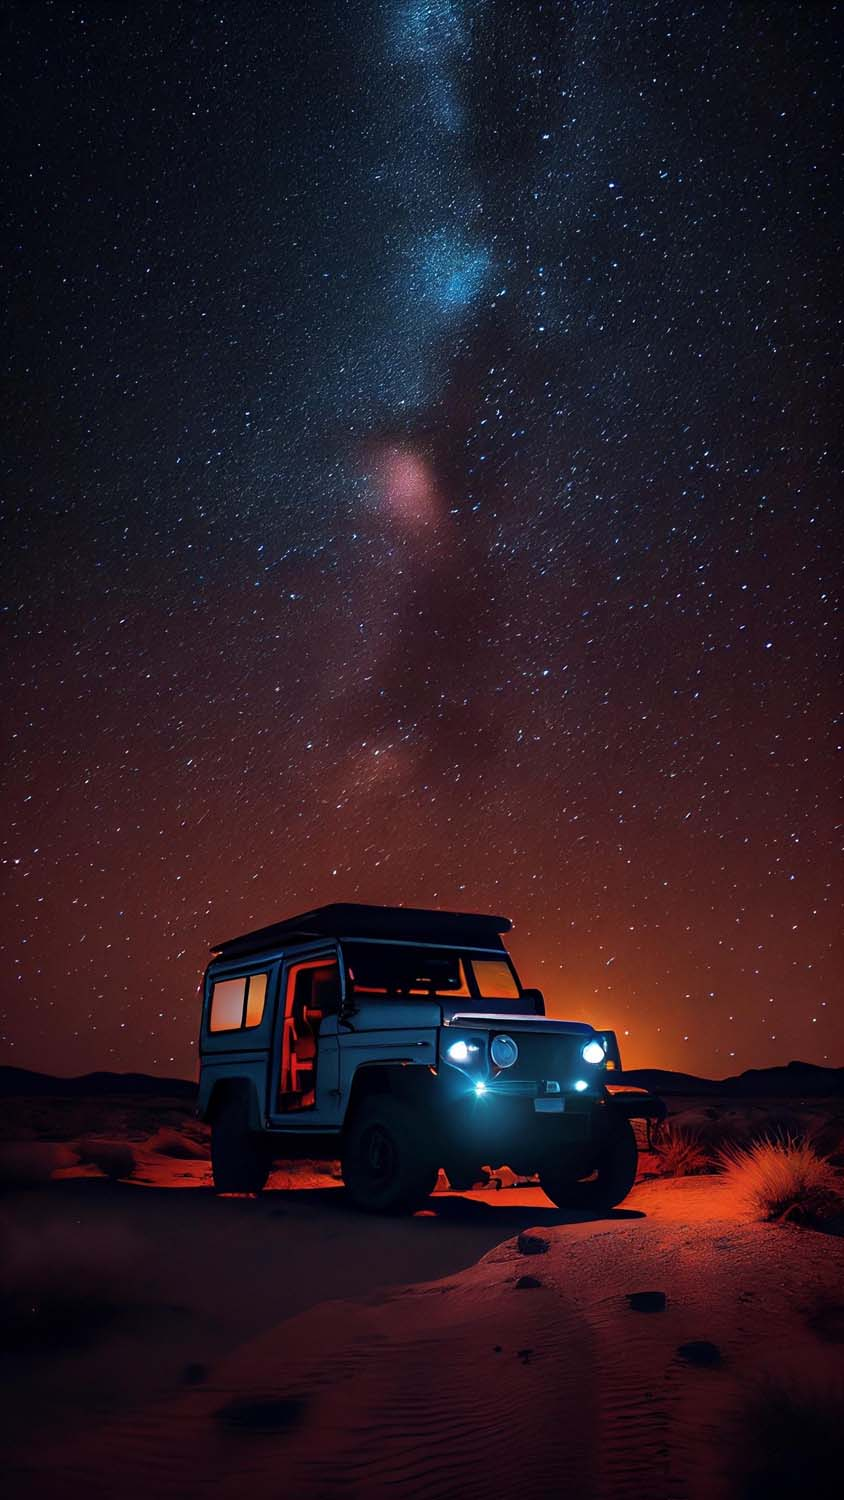 Starry Night Camping IPhone Wallpaper HD  IPhone Wallpapers